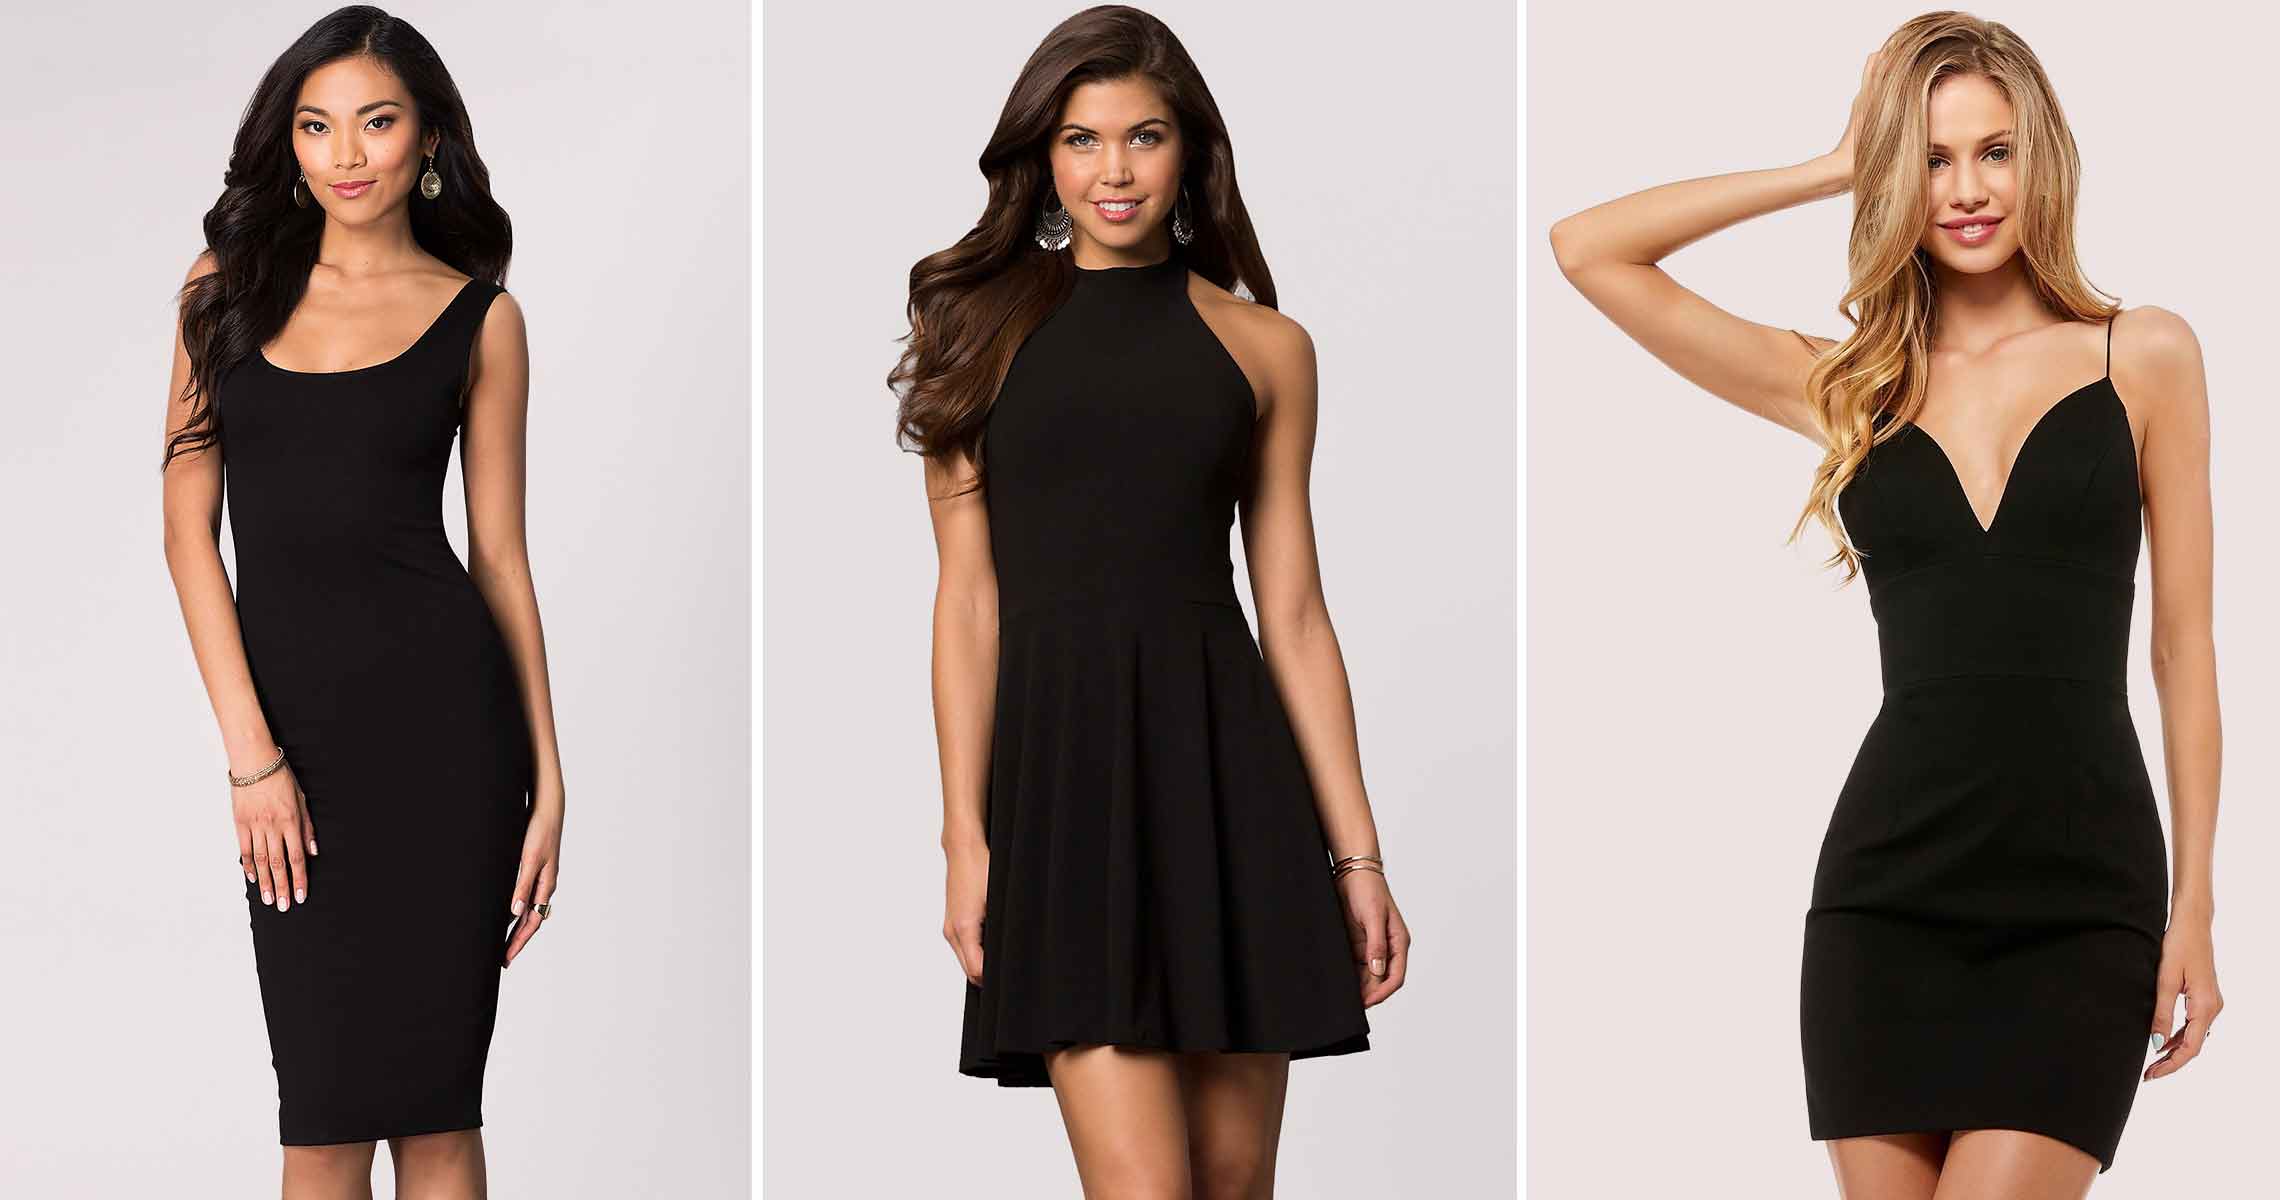 Hairstyles and Makeup to Wear With a Little Black Dress